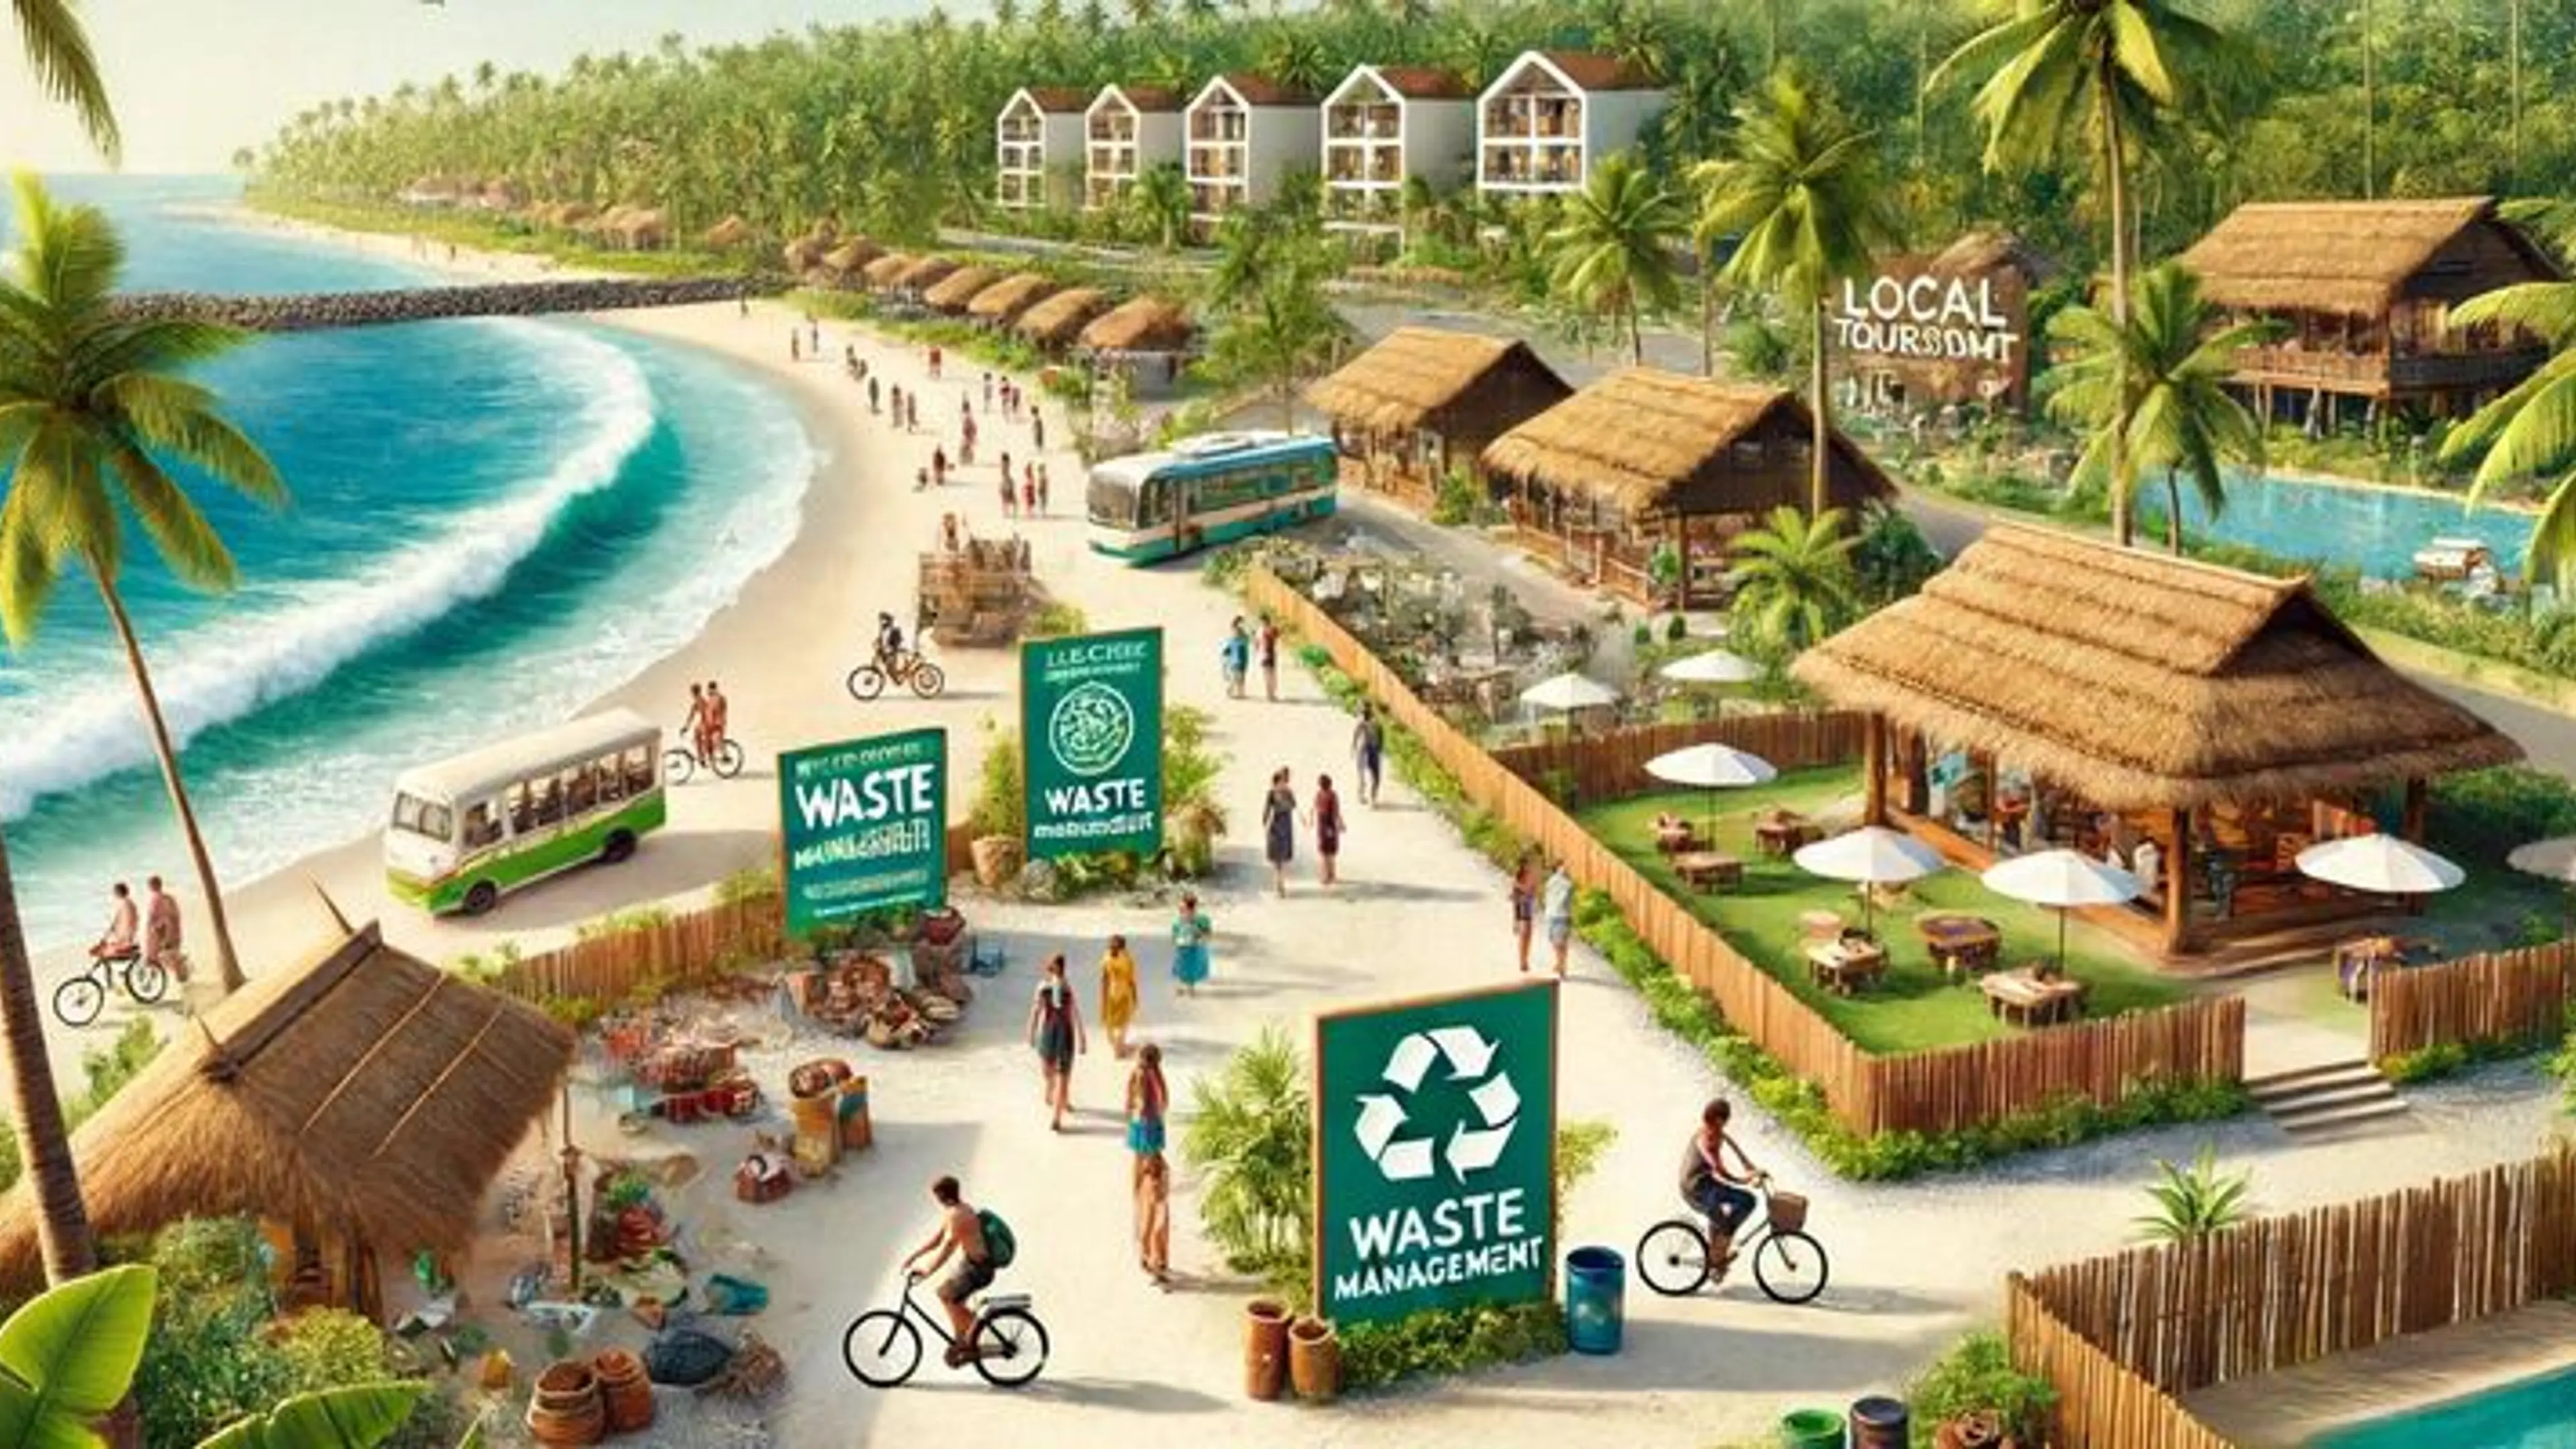 Goa: From Sunsets to Sustainability - How the Sunshine State is Going Green